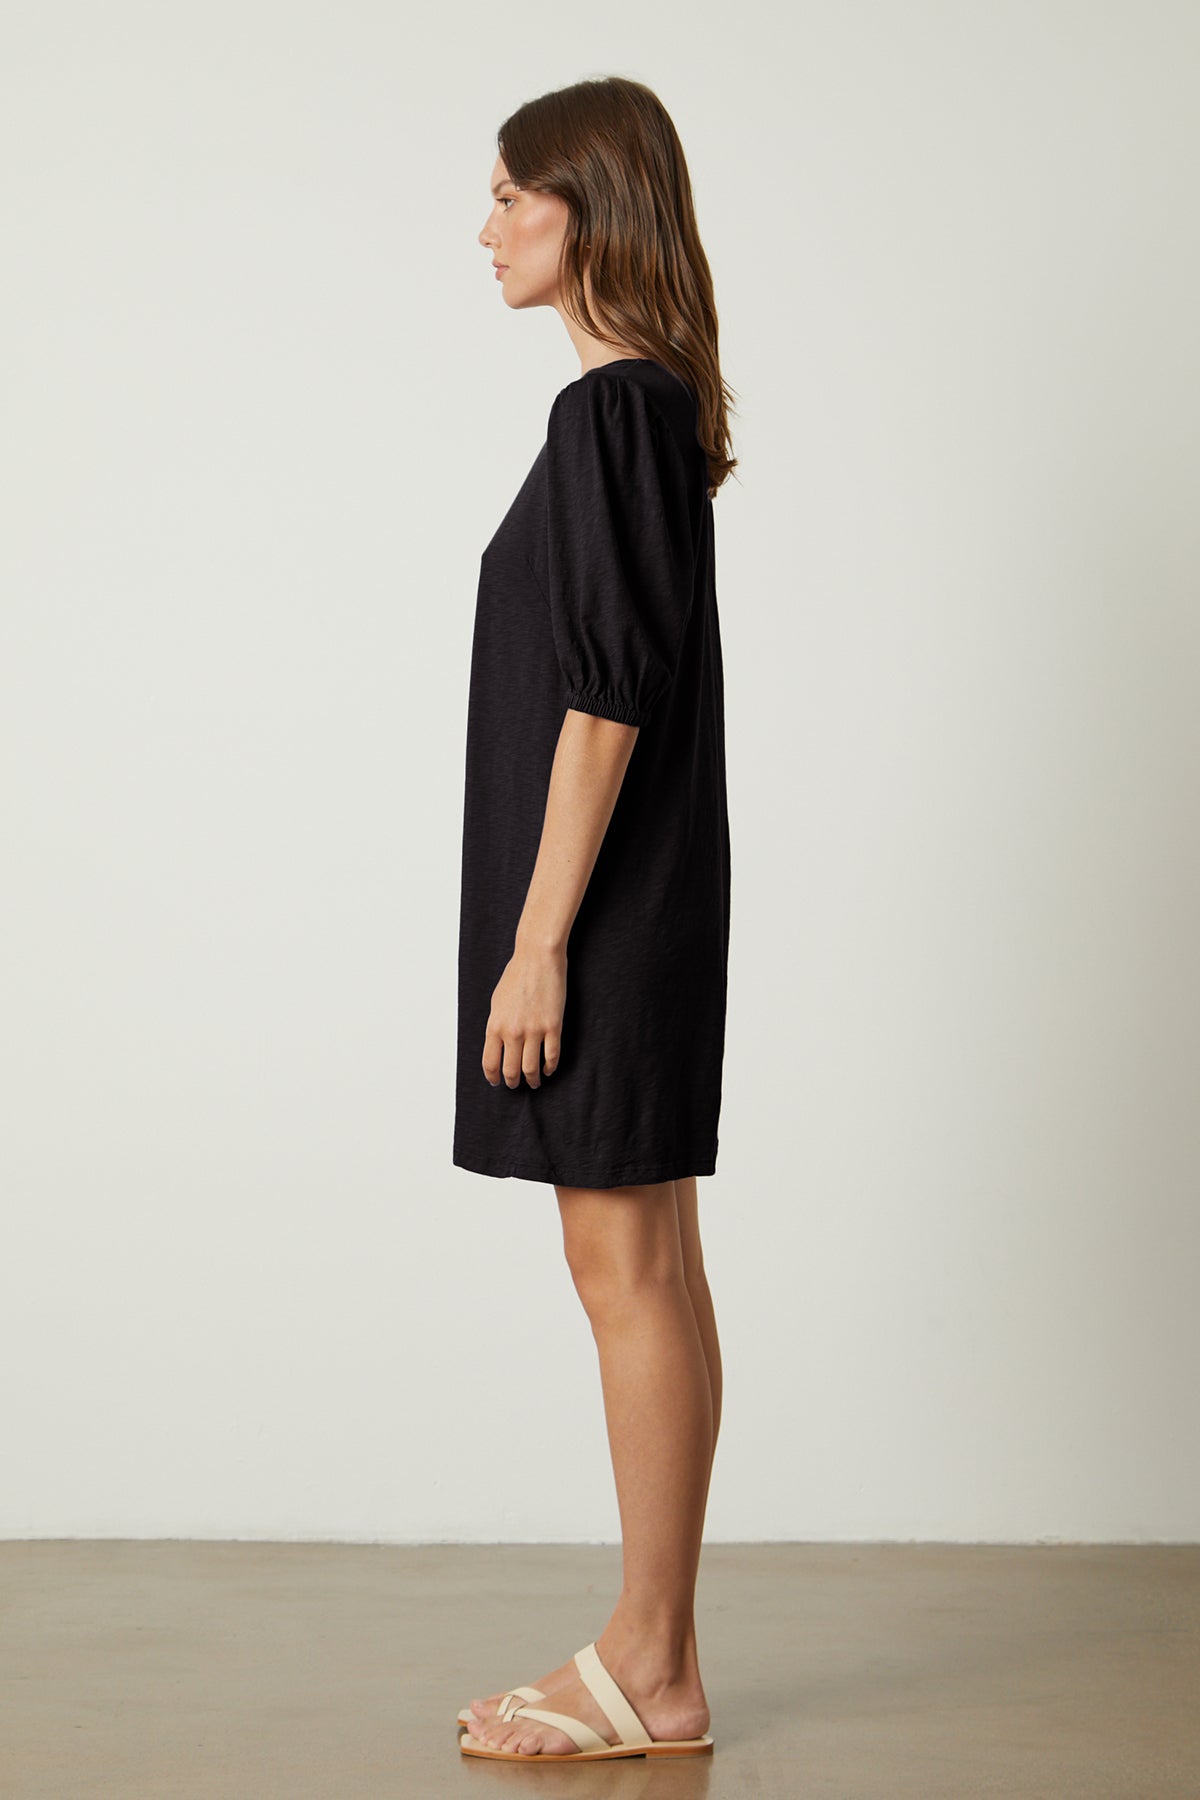 Meghan Dress in black with puff sleeves full length side-26022634848449